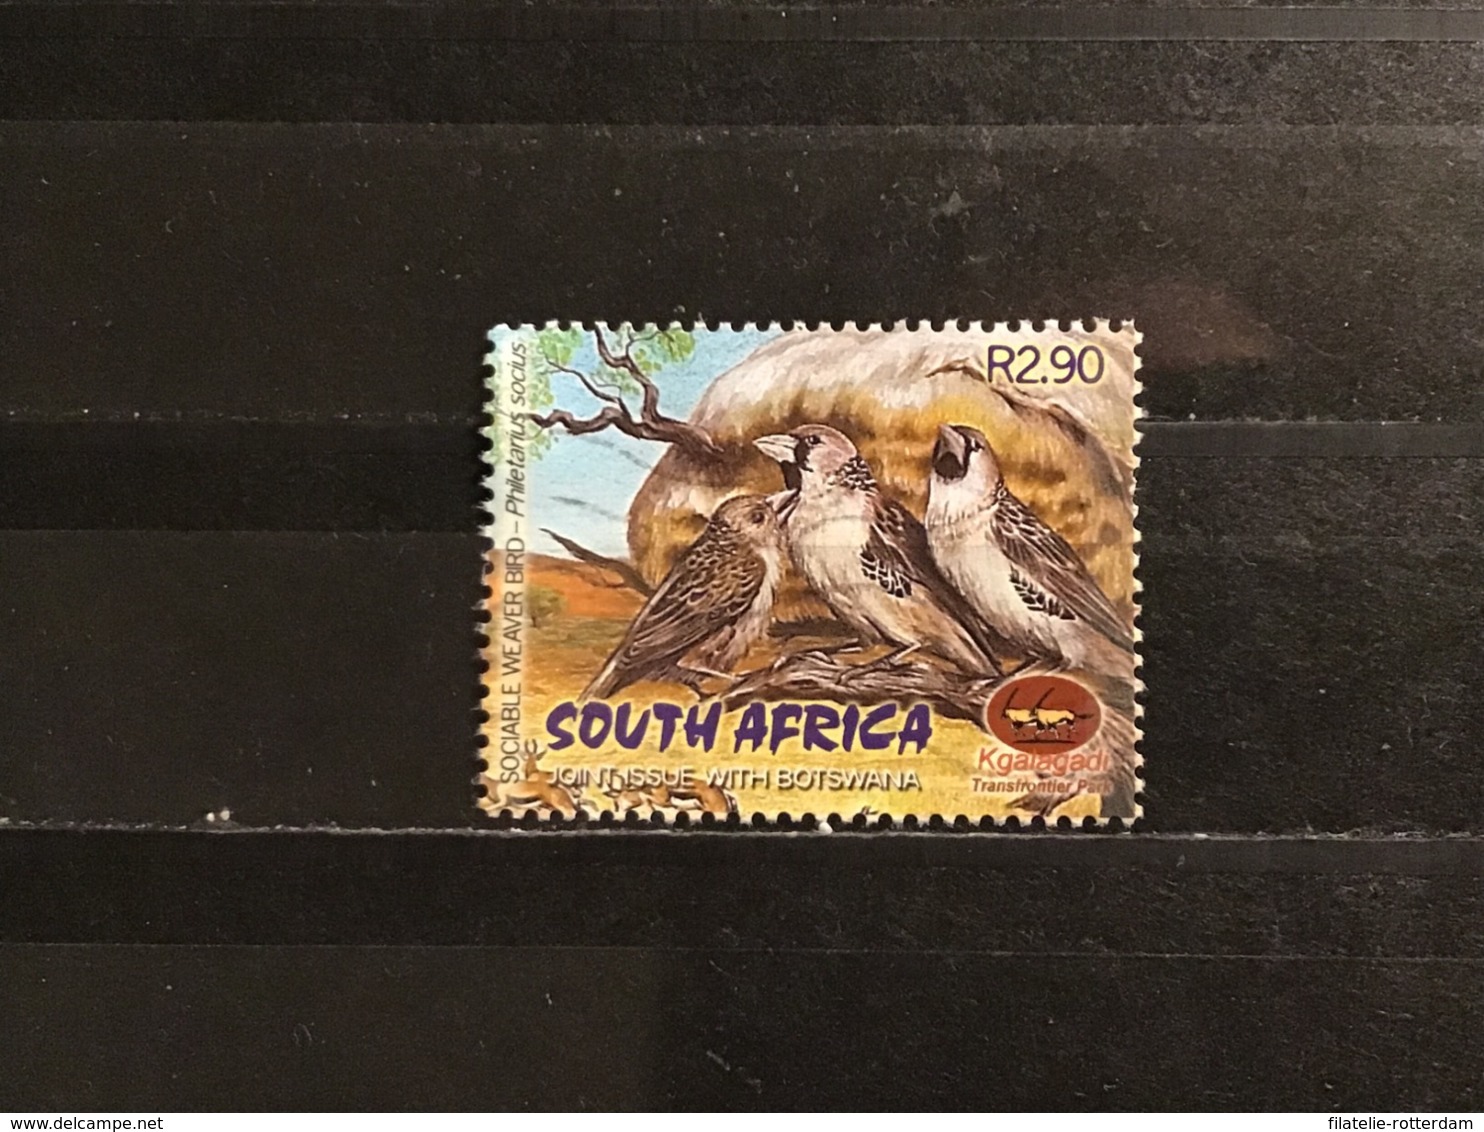 Zuid-Afrika / South Africa - Joint-Issue Met Botswana 2016 - Usados